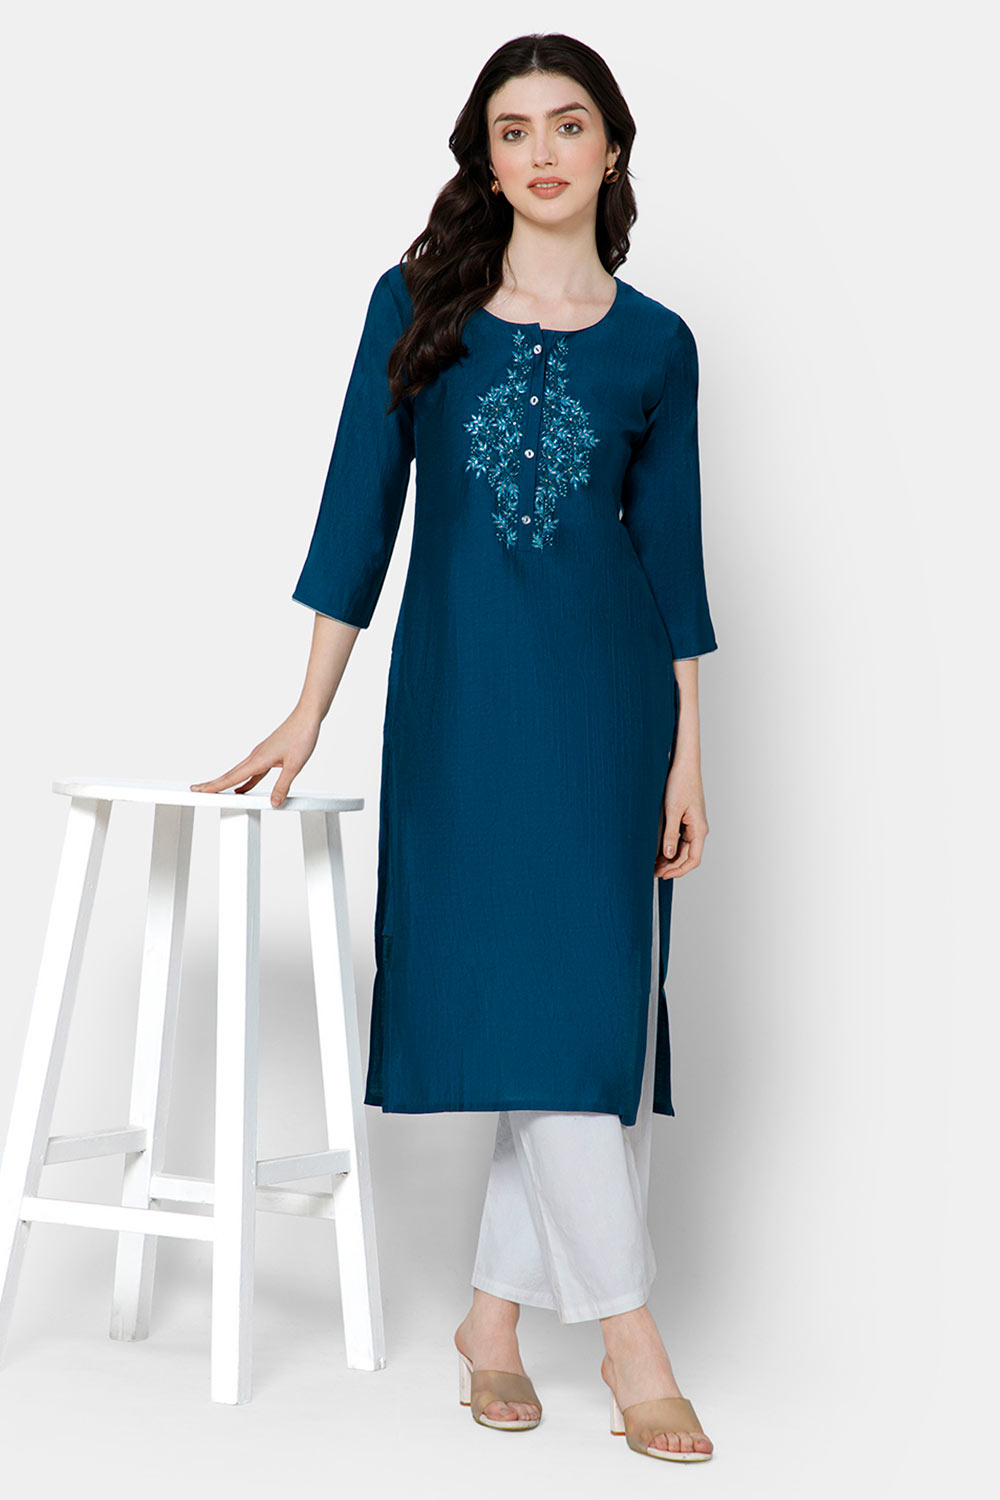 Mythri Women's Kurthi with Intricately Hand Embroidered Center Front - Blue - E053